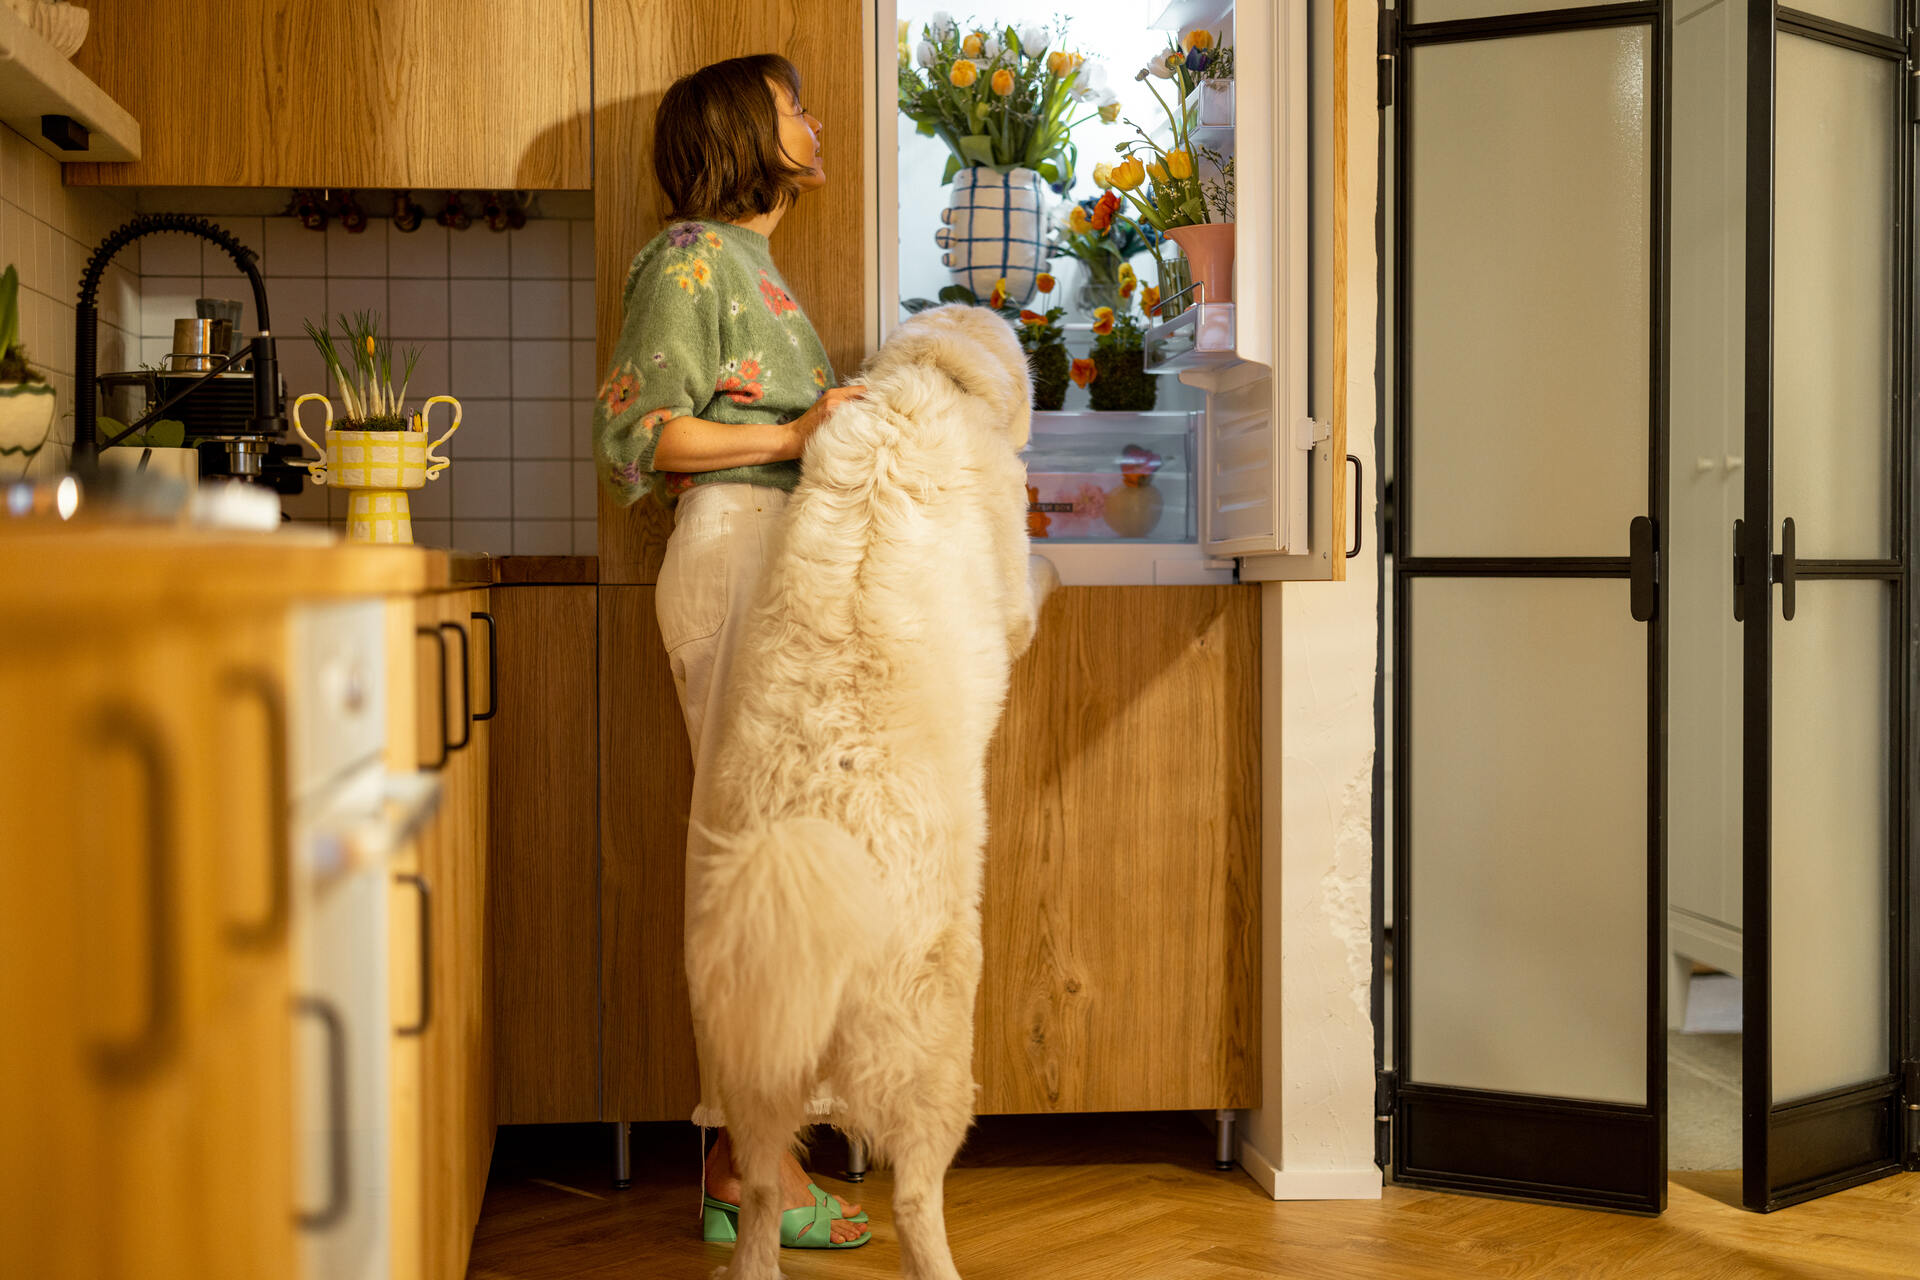 A woman and dog inspecting a fridge full of flower pots